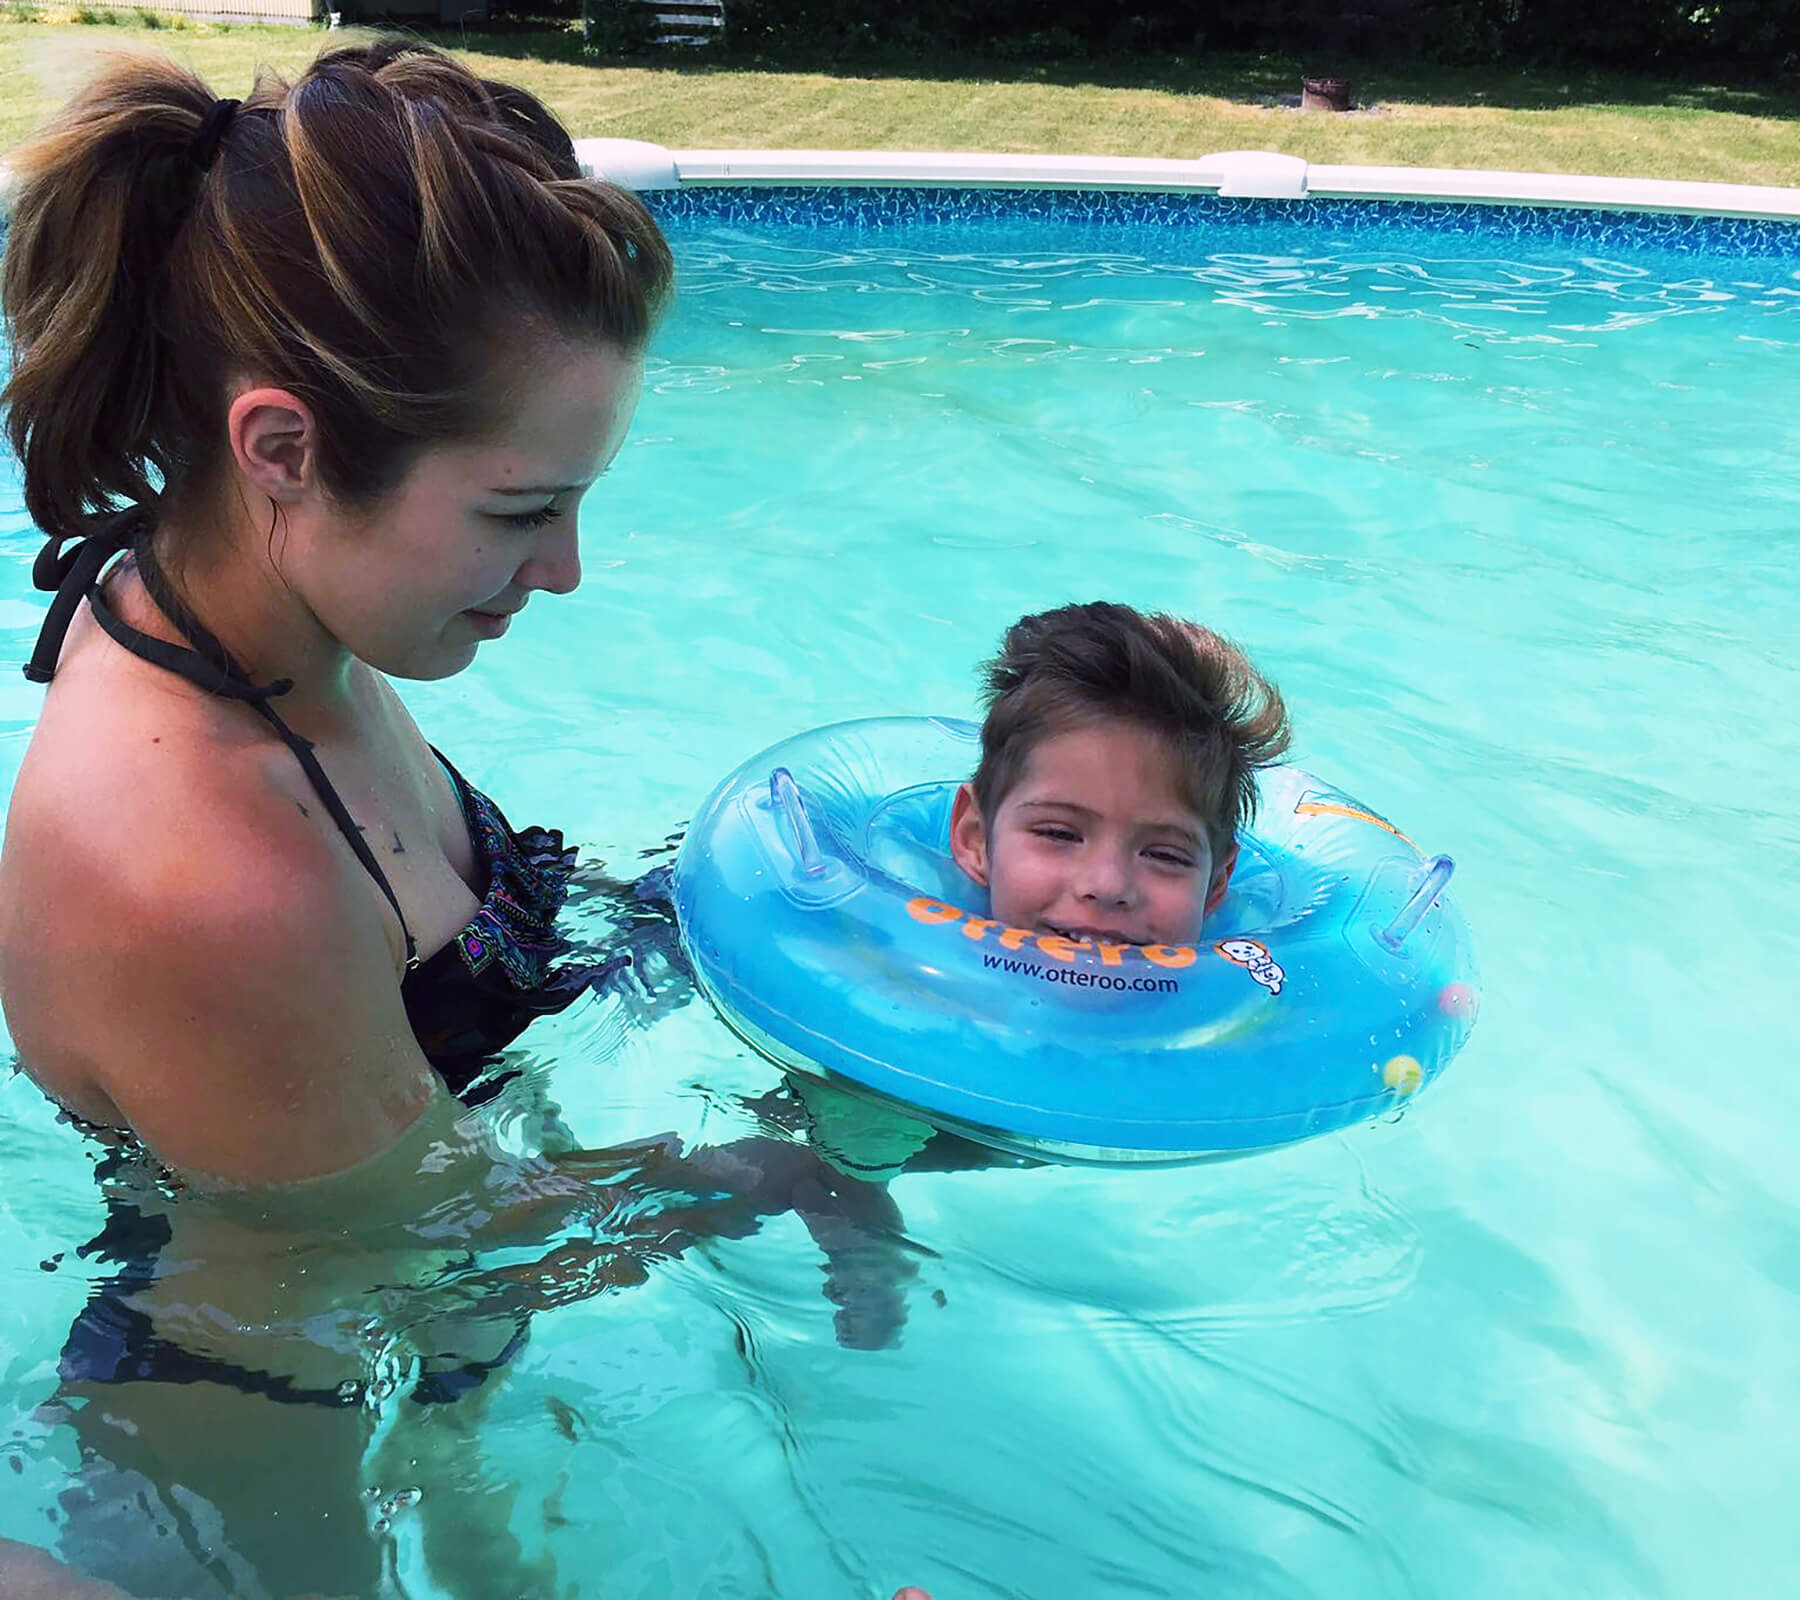 Mom of Boy With Cerebral Palsy: 'I'm Just Really Happy That We Found This'